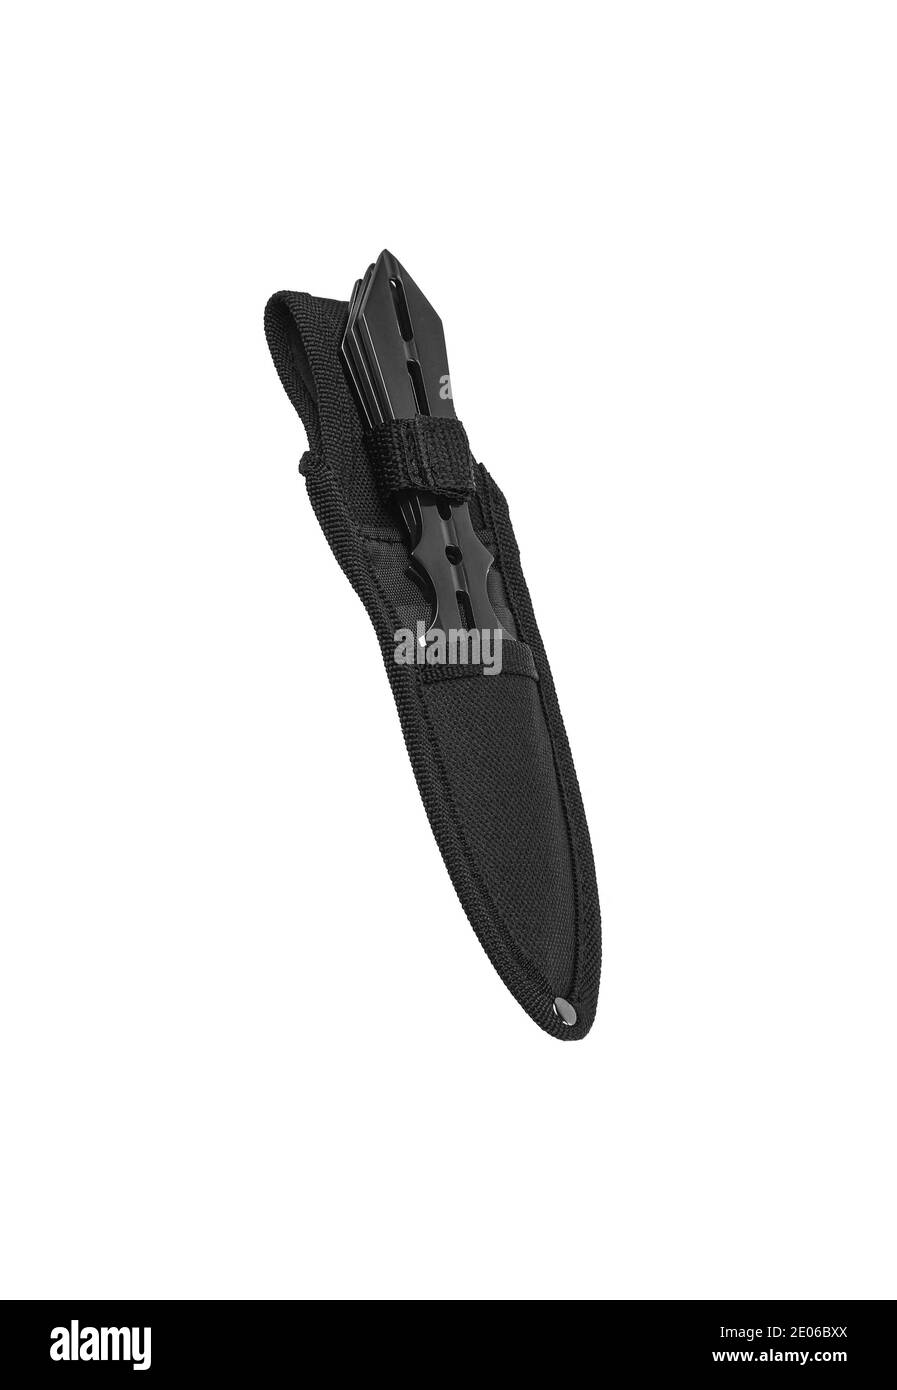 https://c8.alamy.com/comp/2E06BXX/metal-throwing-knives-isolate-on-a-white-background-ninja-weapons-silent-weapon-2E06BXX.jpg